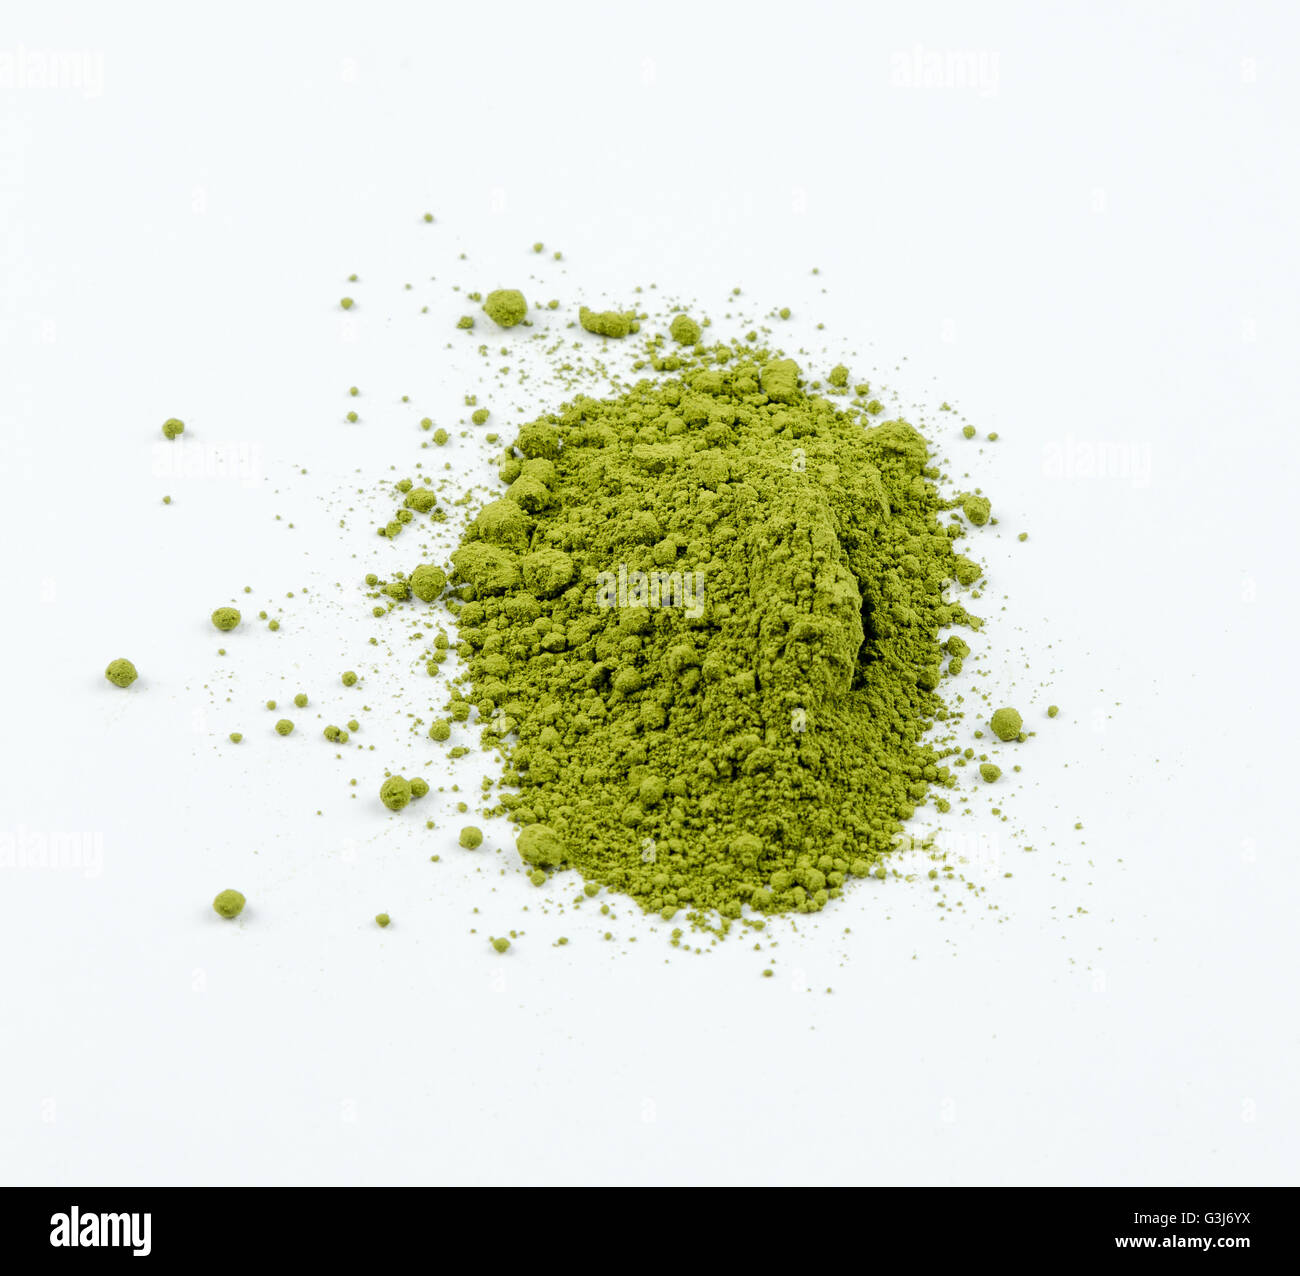 Traditional Japanese tea - matcha. Melted tea on white background is ready for editing Stock Photo